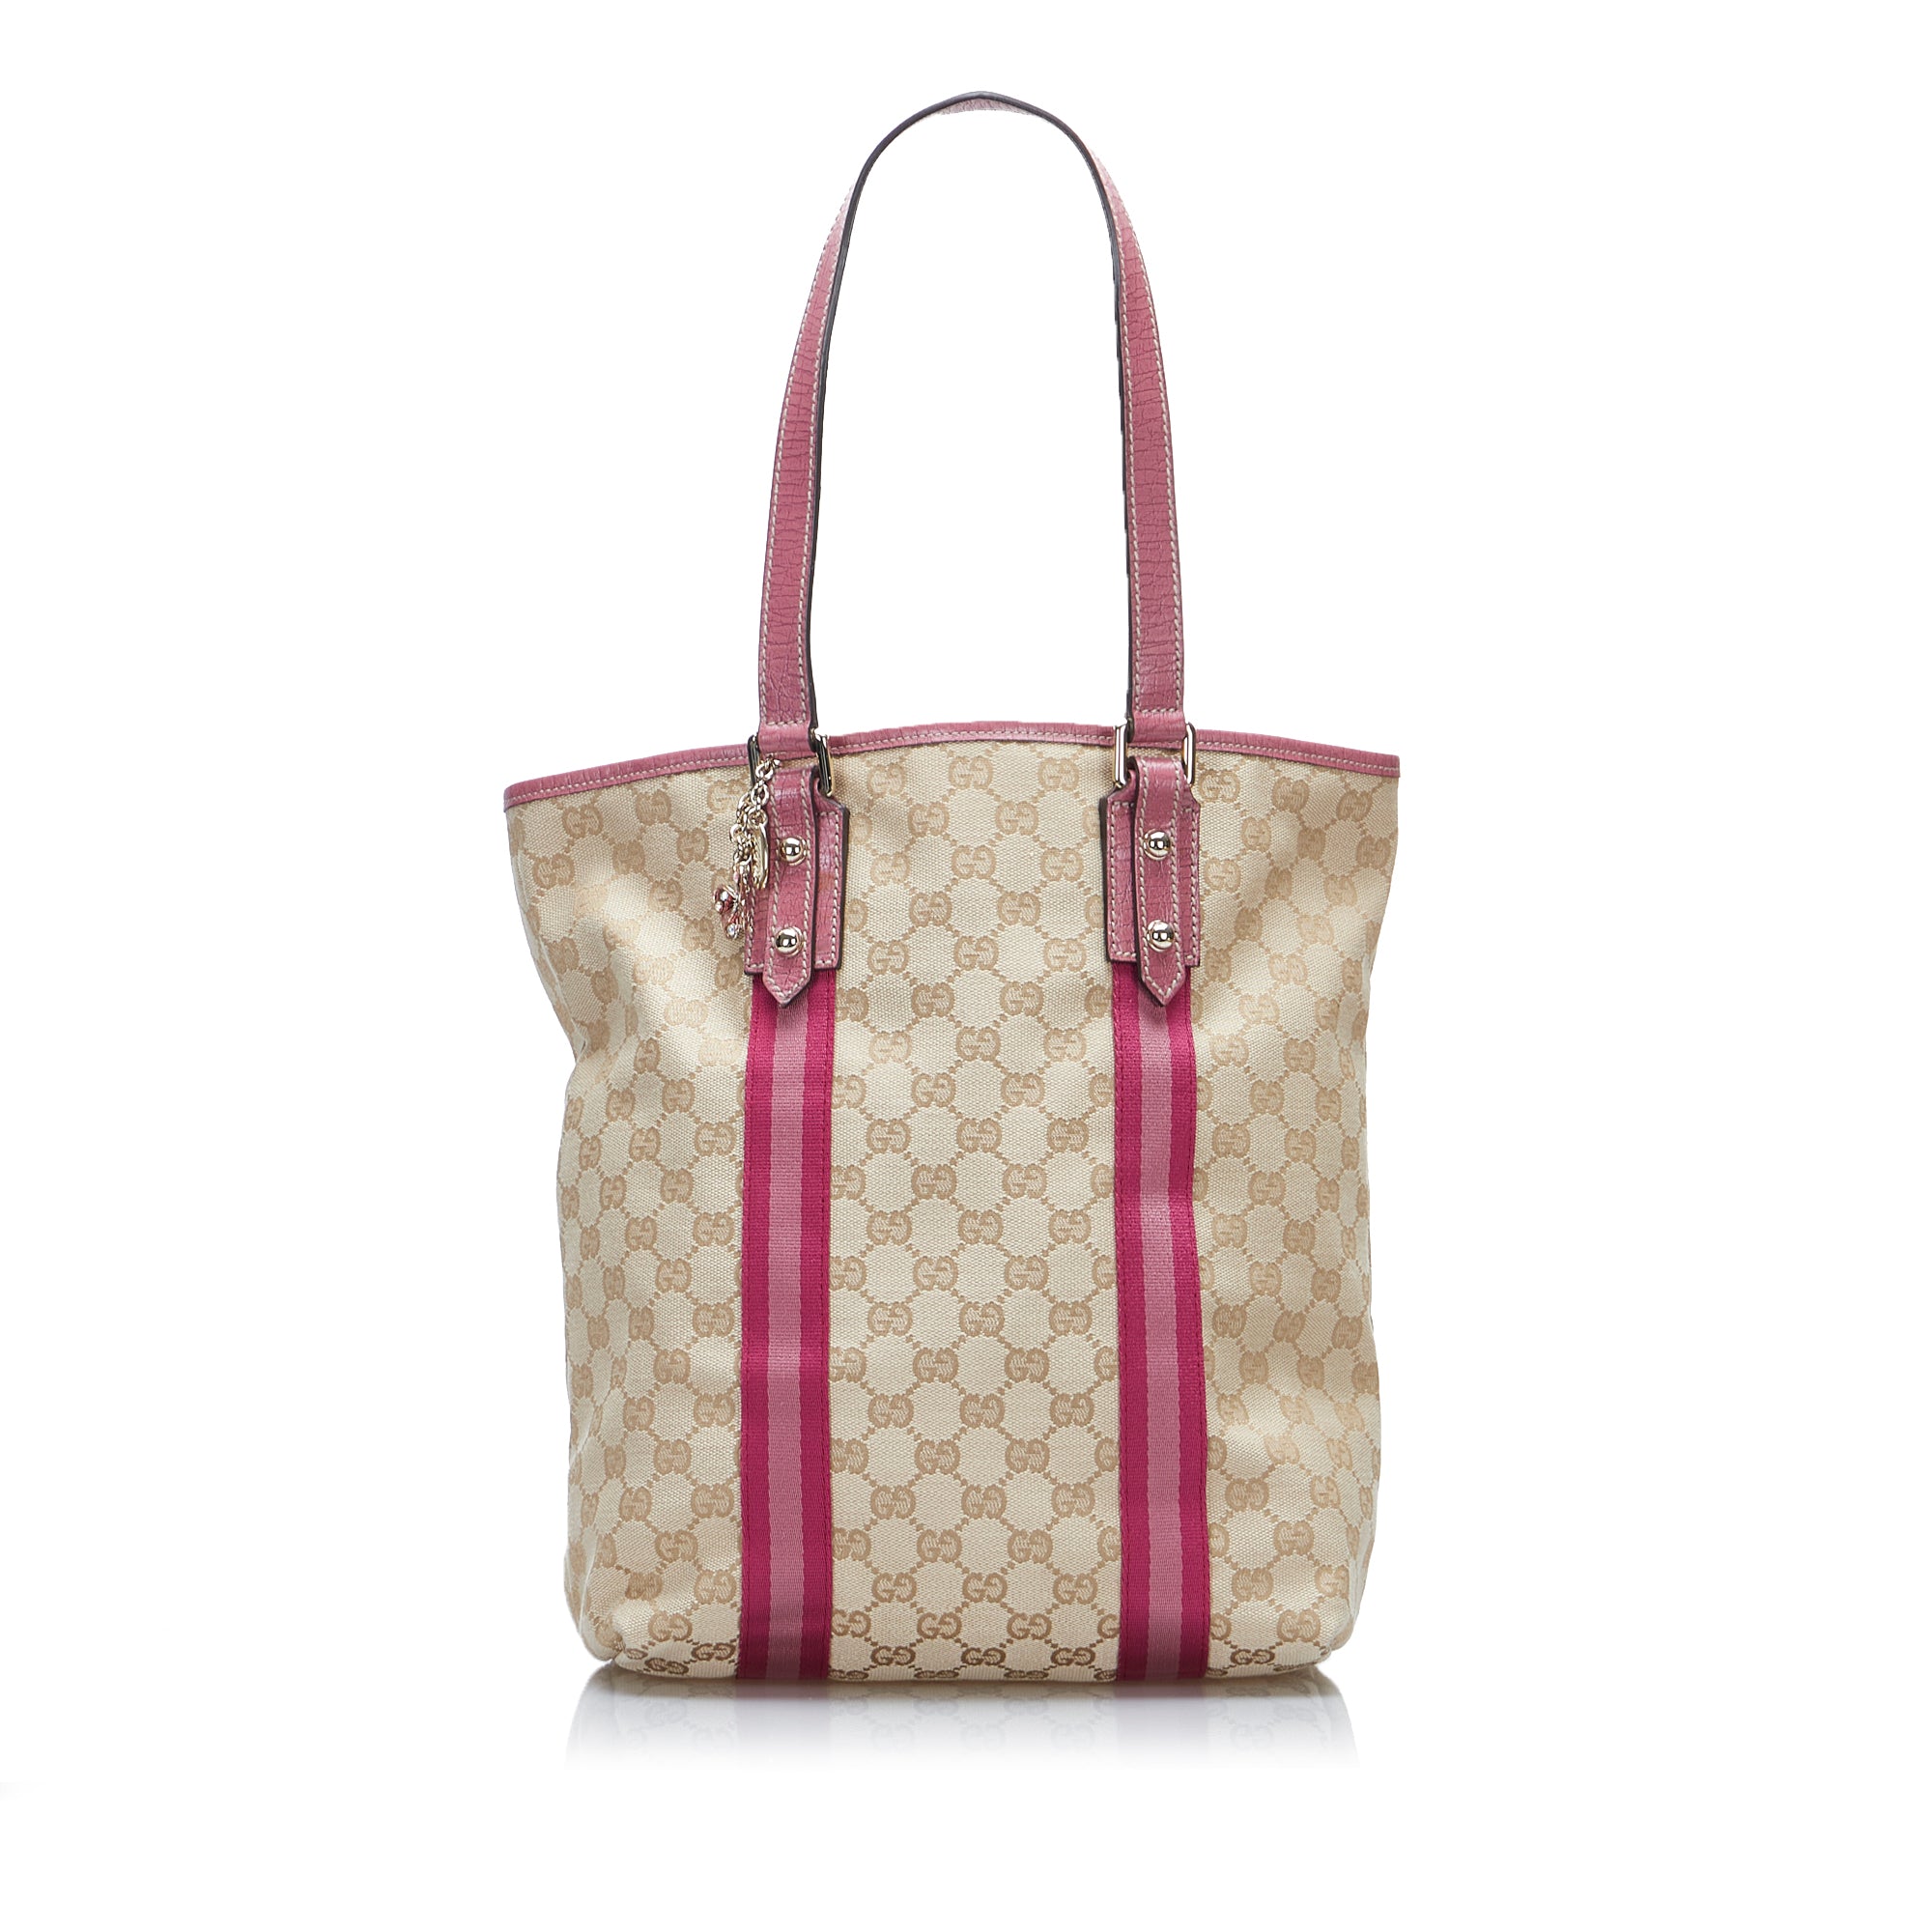 Gucci Kids' Gg-canvas Buckled Backpack In Pink